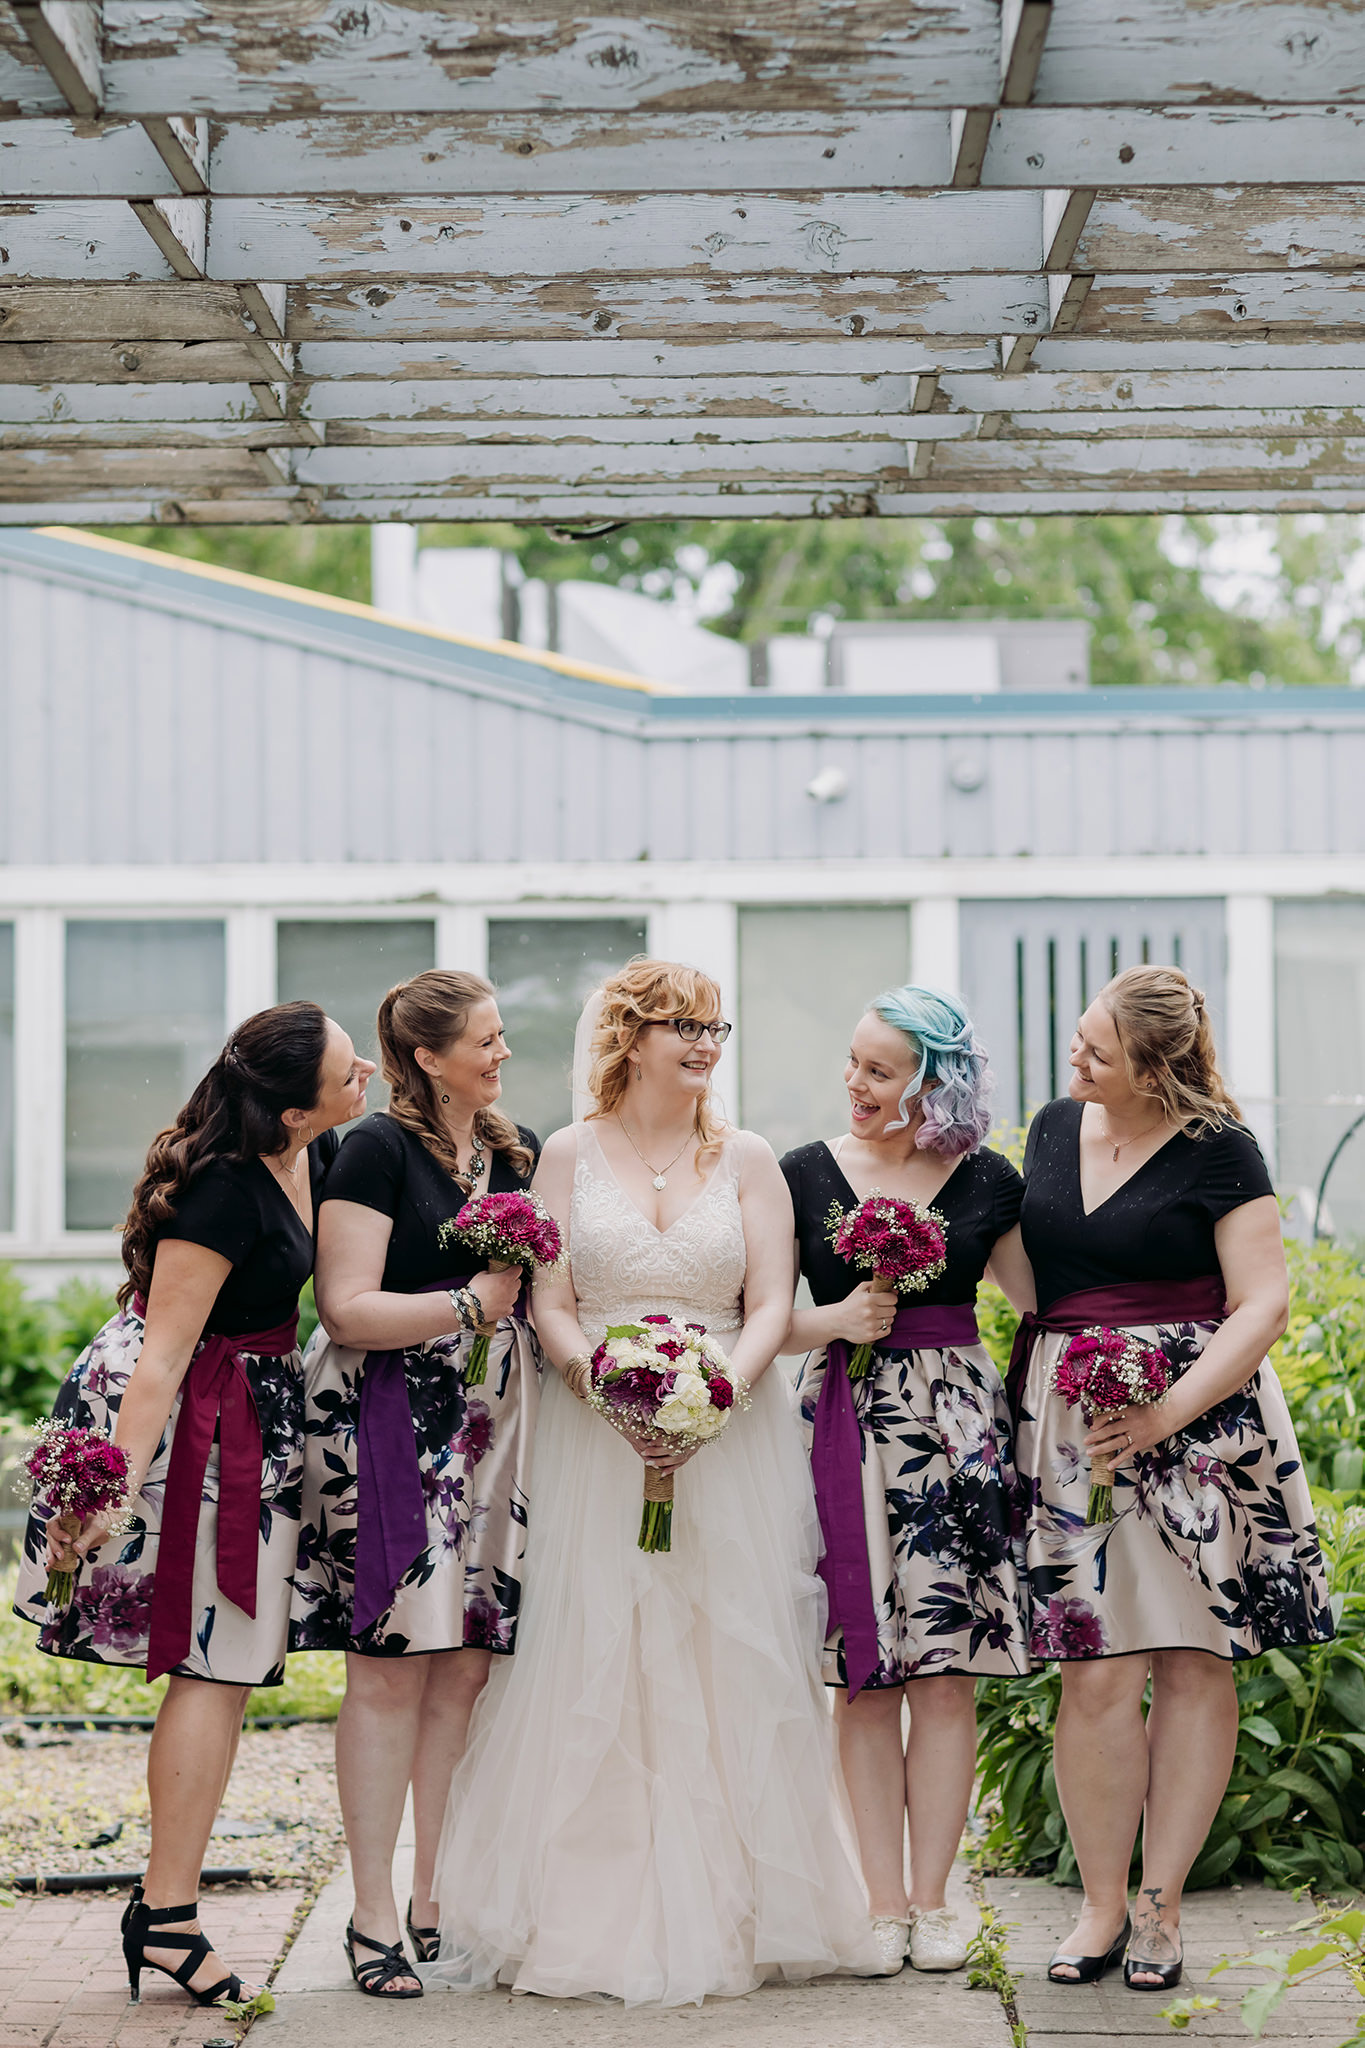 Calgary intimate wedding party portraits in the city with bridesmaids